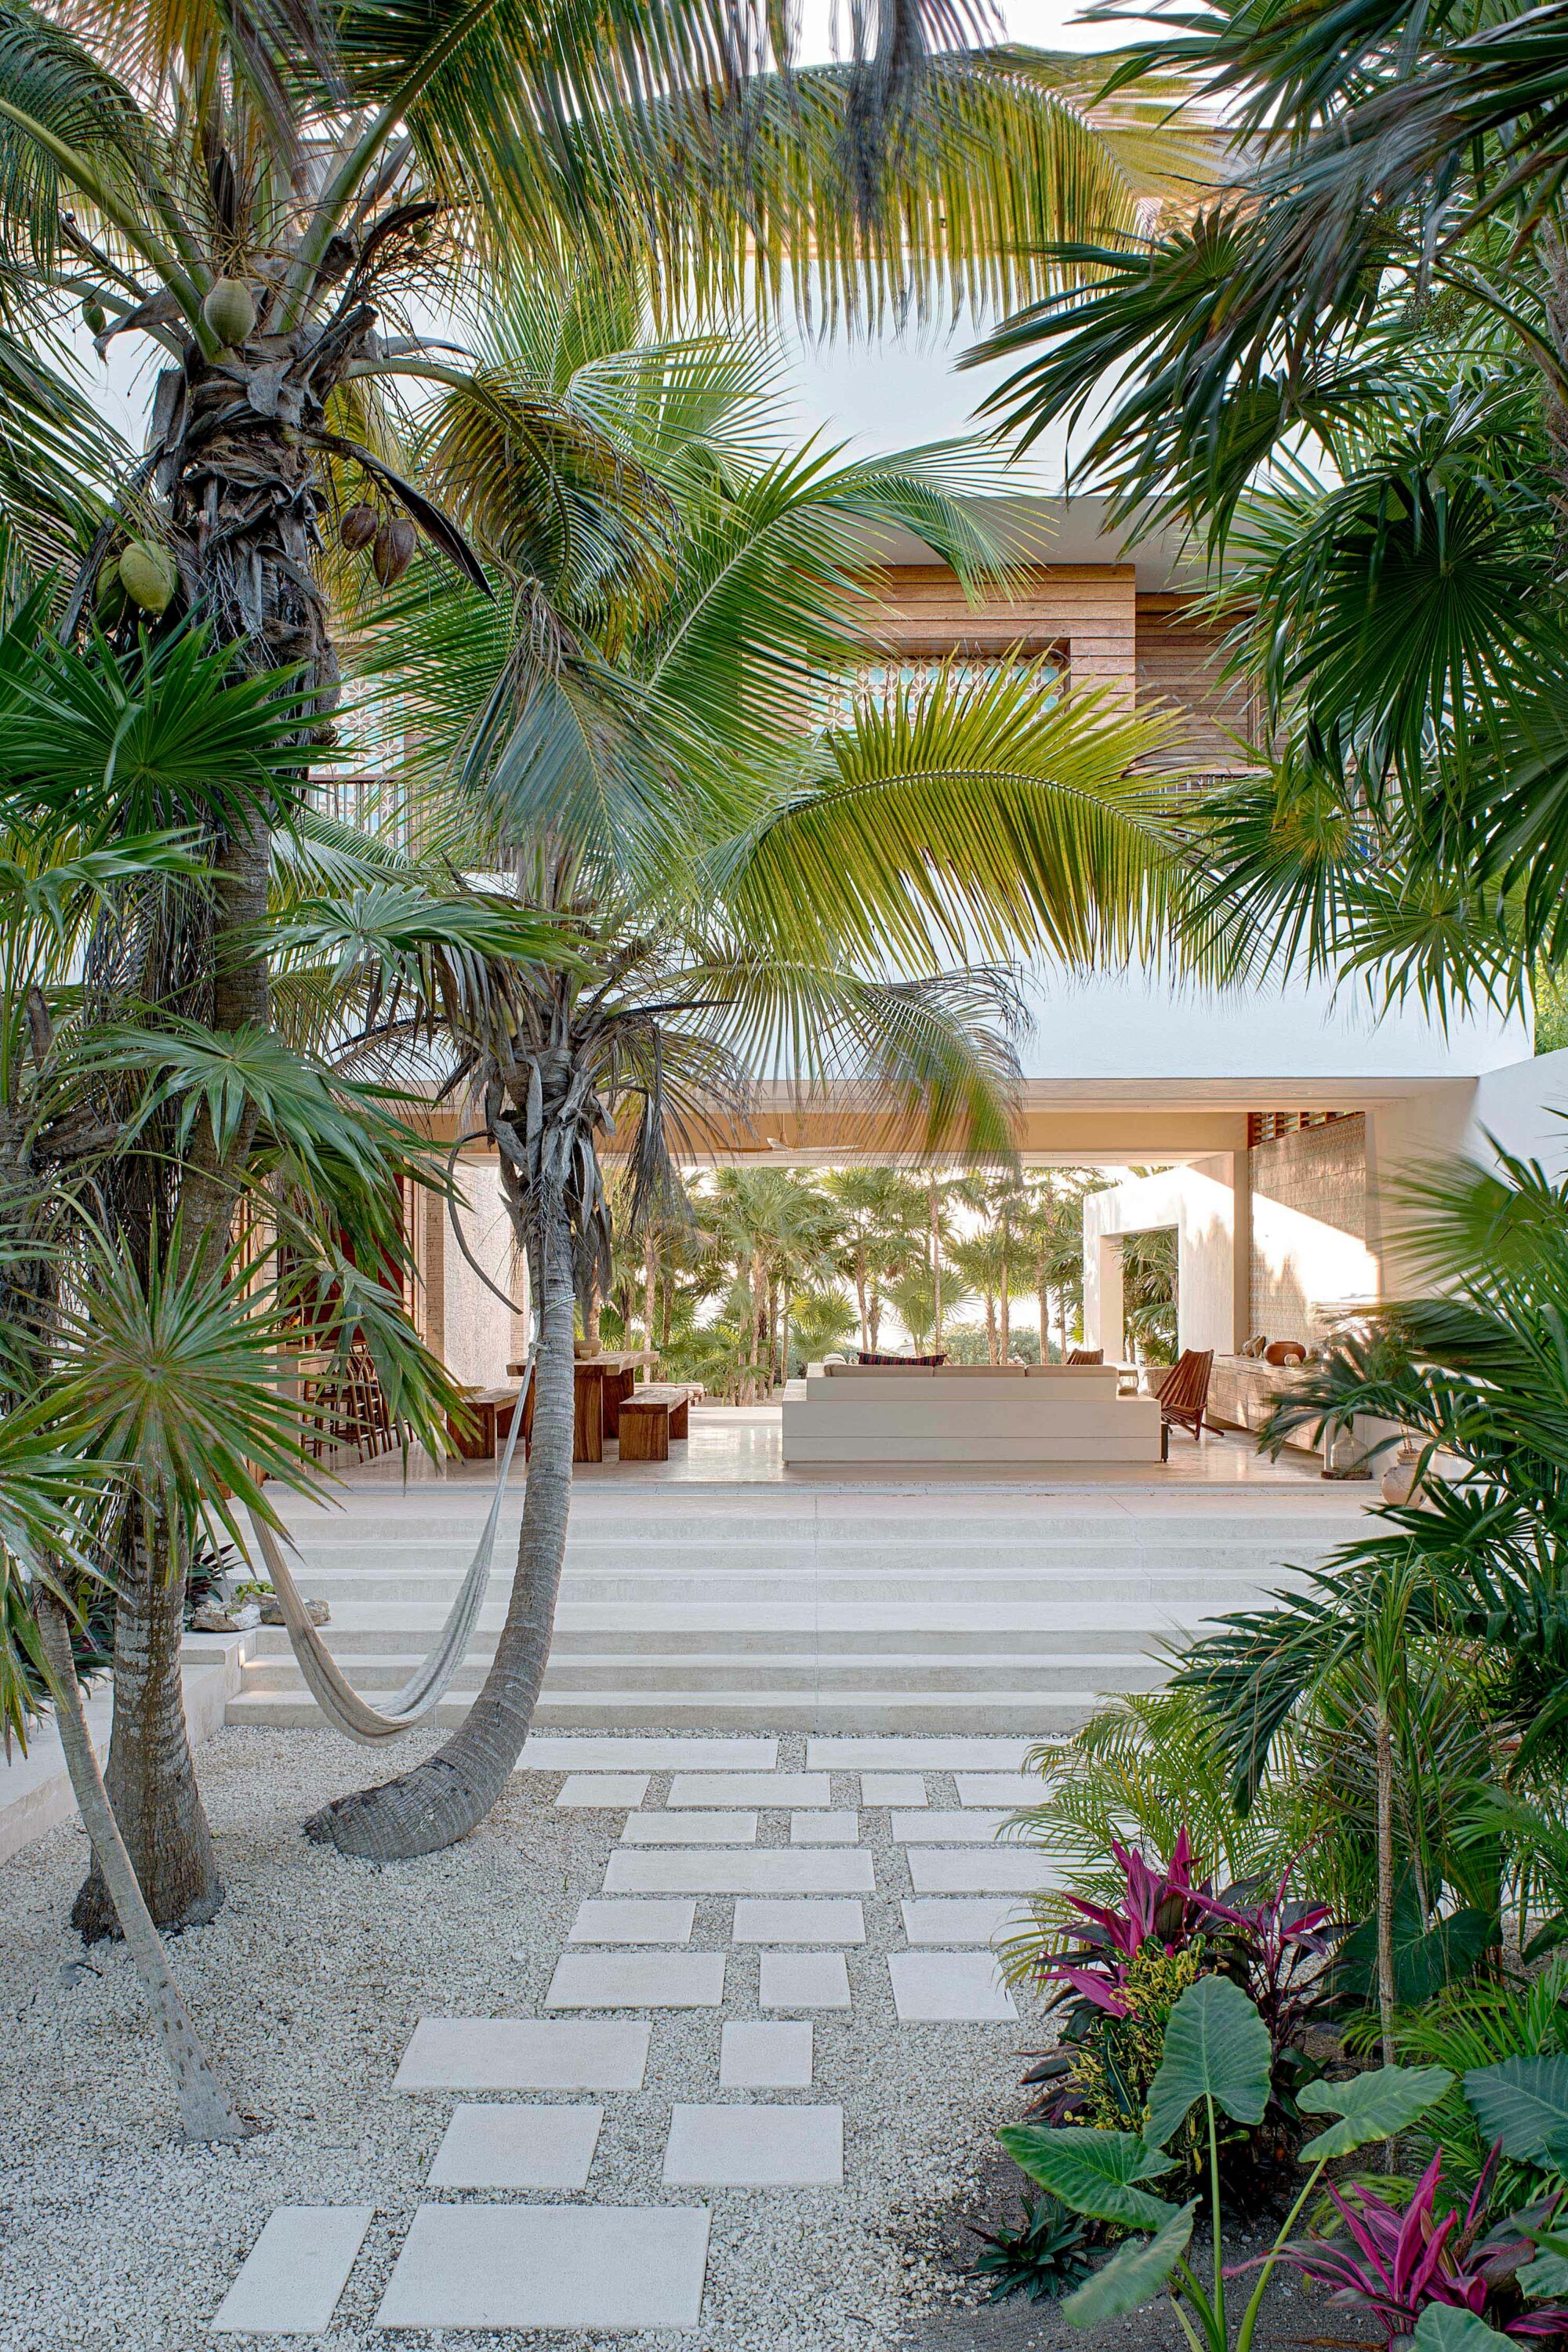 Exterior photo of Casa Xixim by Specht Novak Architects. Shot by Taggart Sorensen, featuring welcoming entryway framed by palm trees into open space living area on ground level.